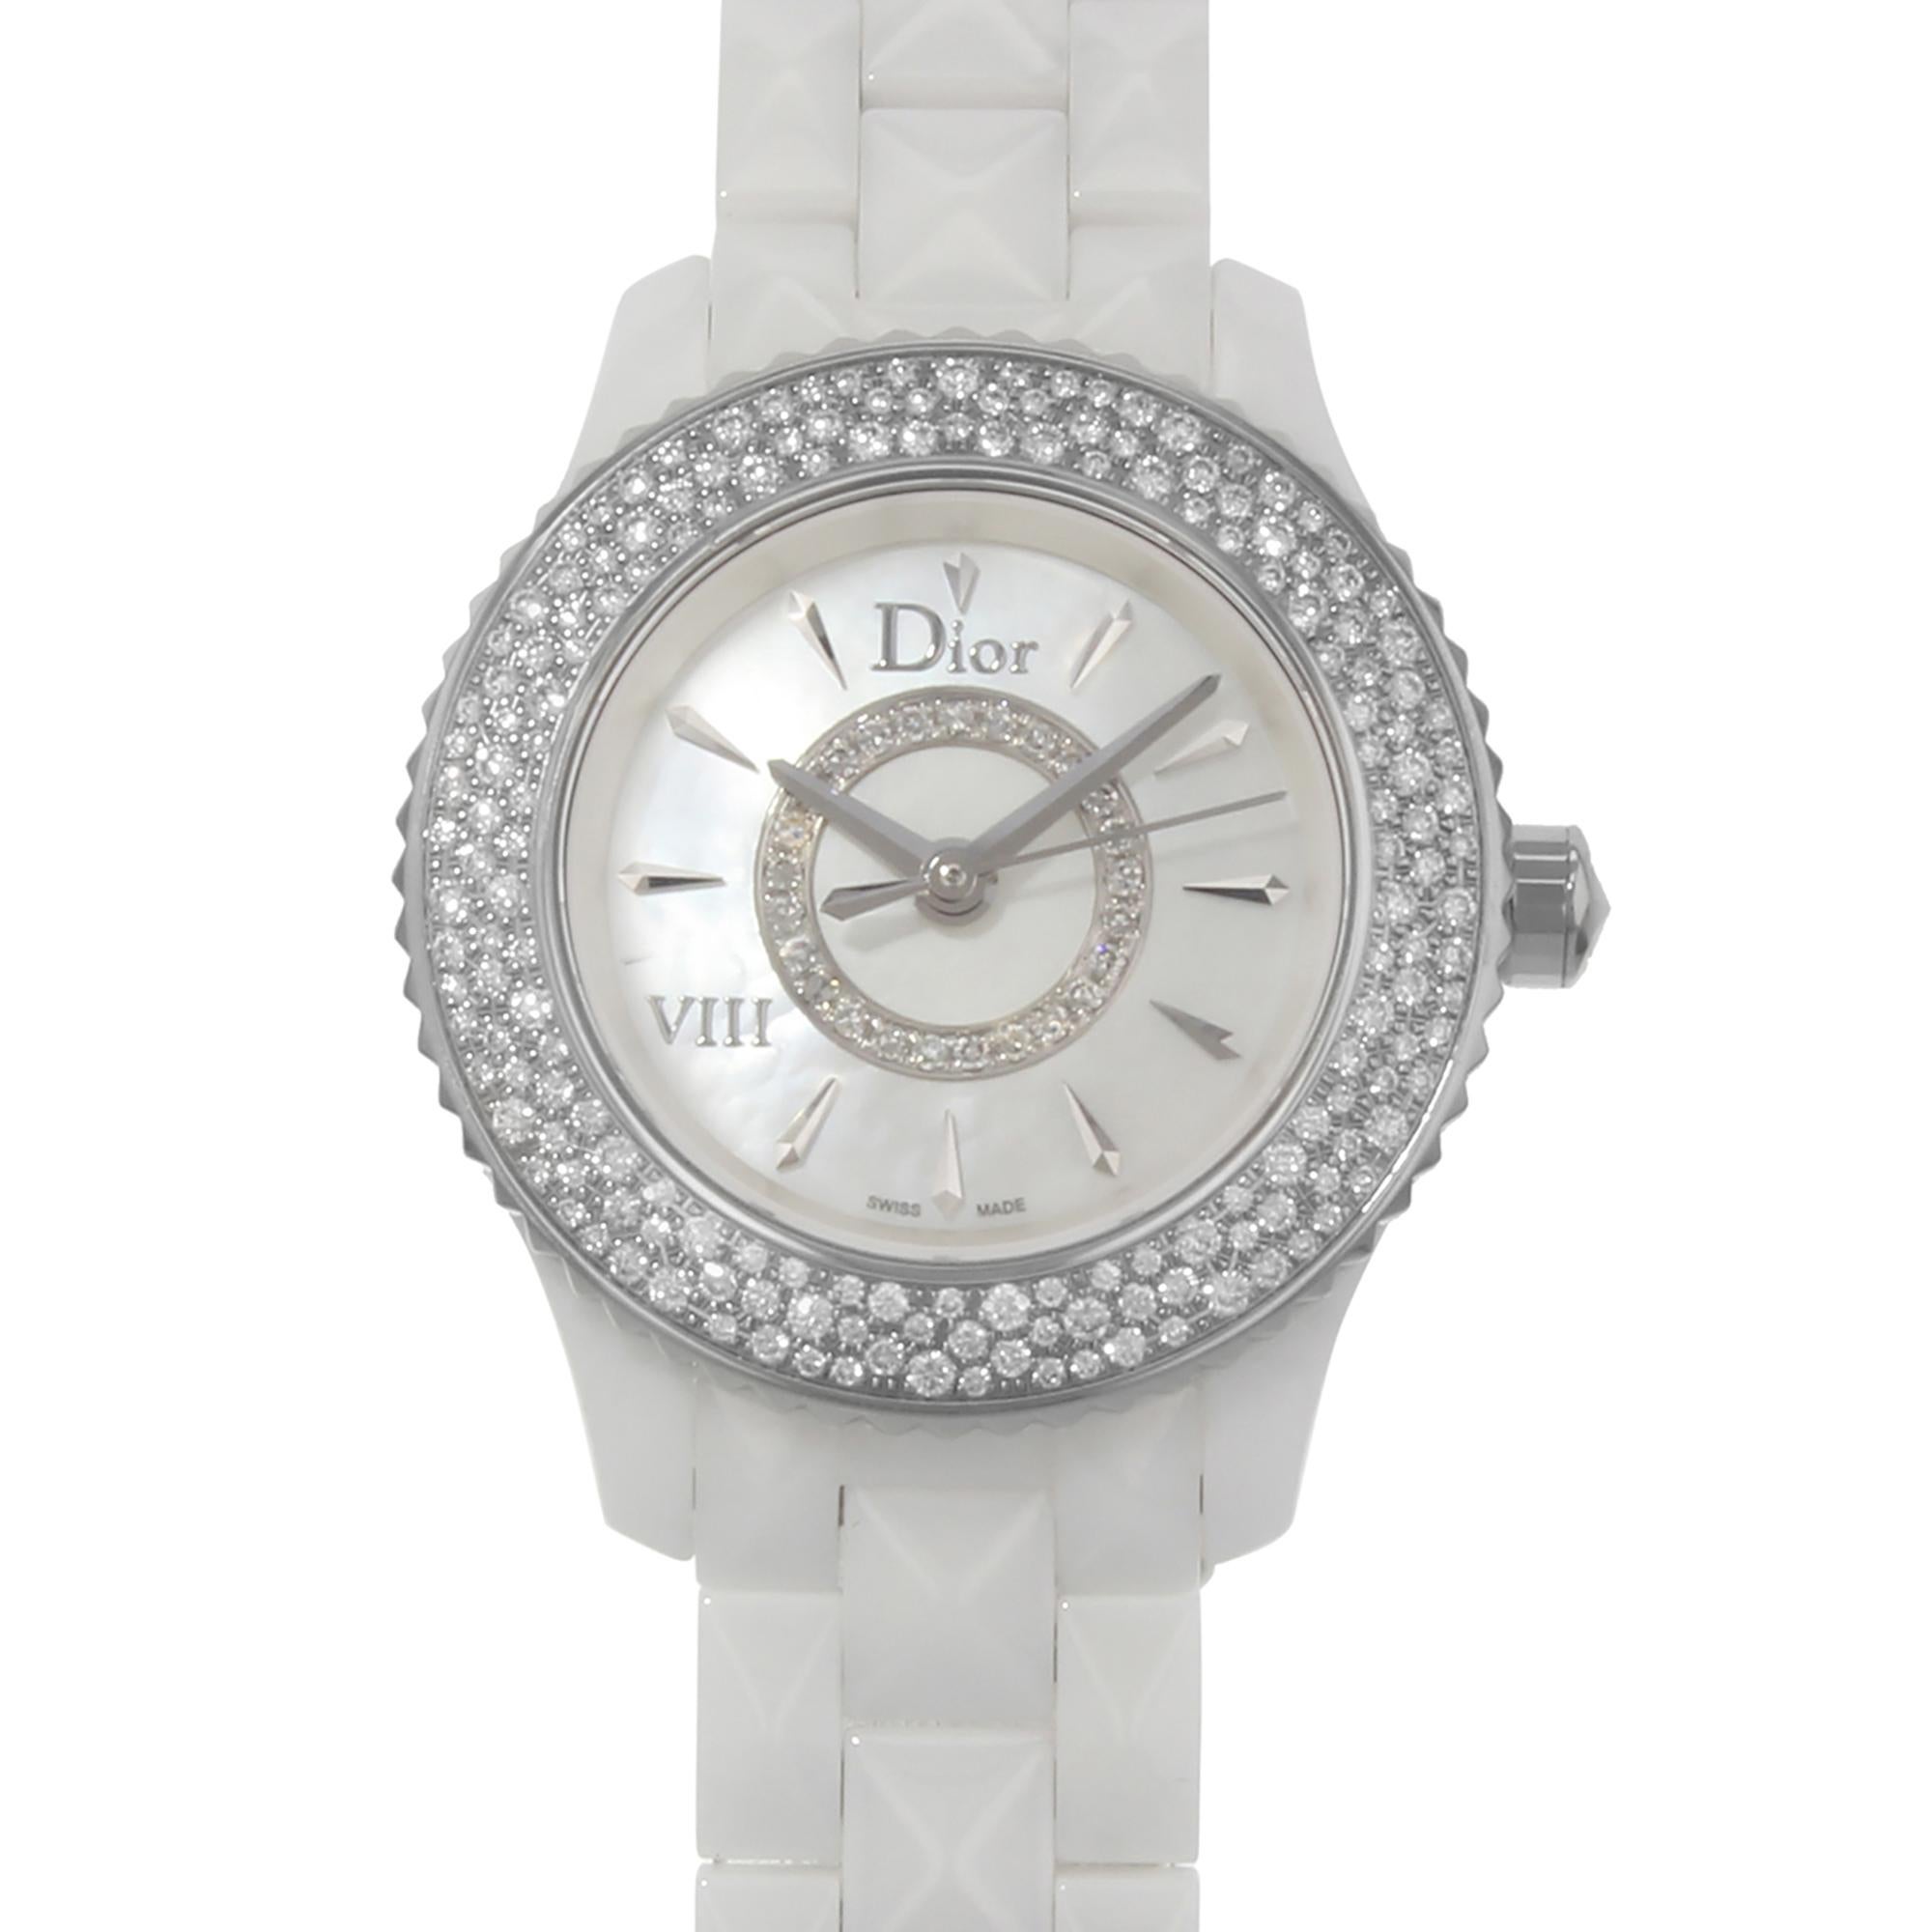 This display model Christian Dior VIII CD1221E4C001  is a beautiful Ladie's timepiece that is powered by quartz (battery) movement which is cased in a ceramic case. It has a round shape face, diamonds dial and has hand sticks style markers. It is